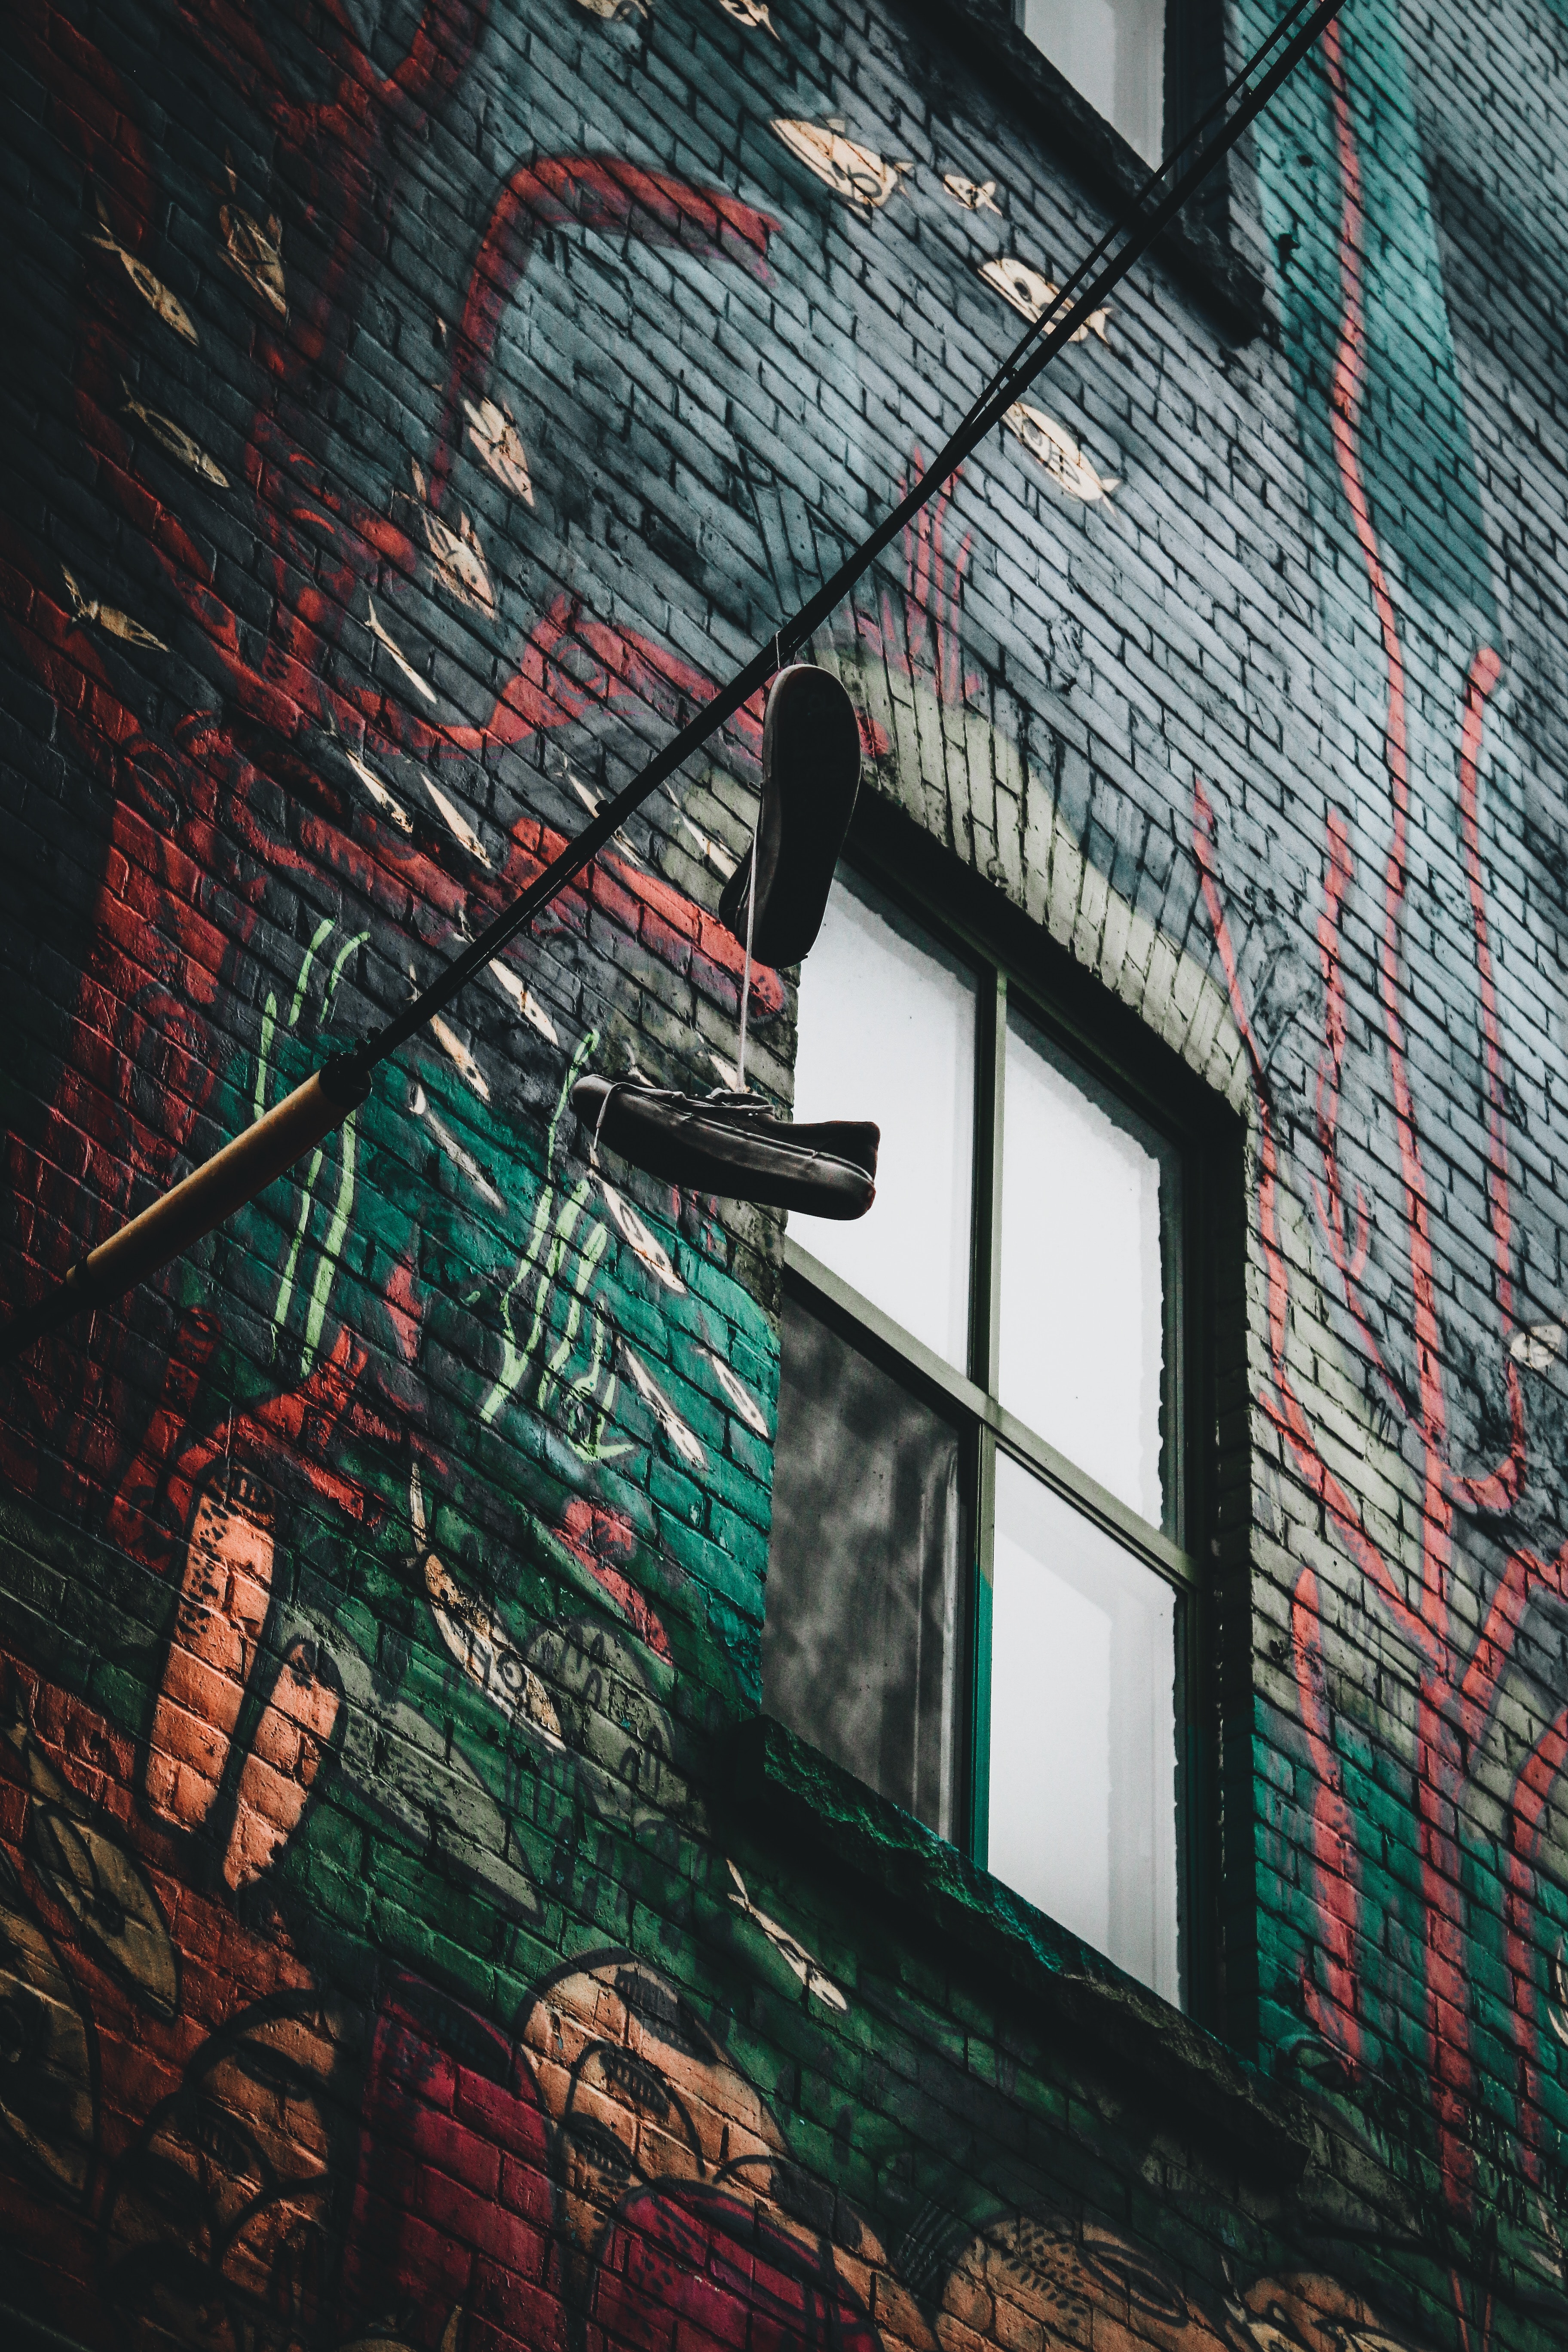 graffiti, shoes, miscellanea, wires, wire, wall, miscellaneous, sneakers, window